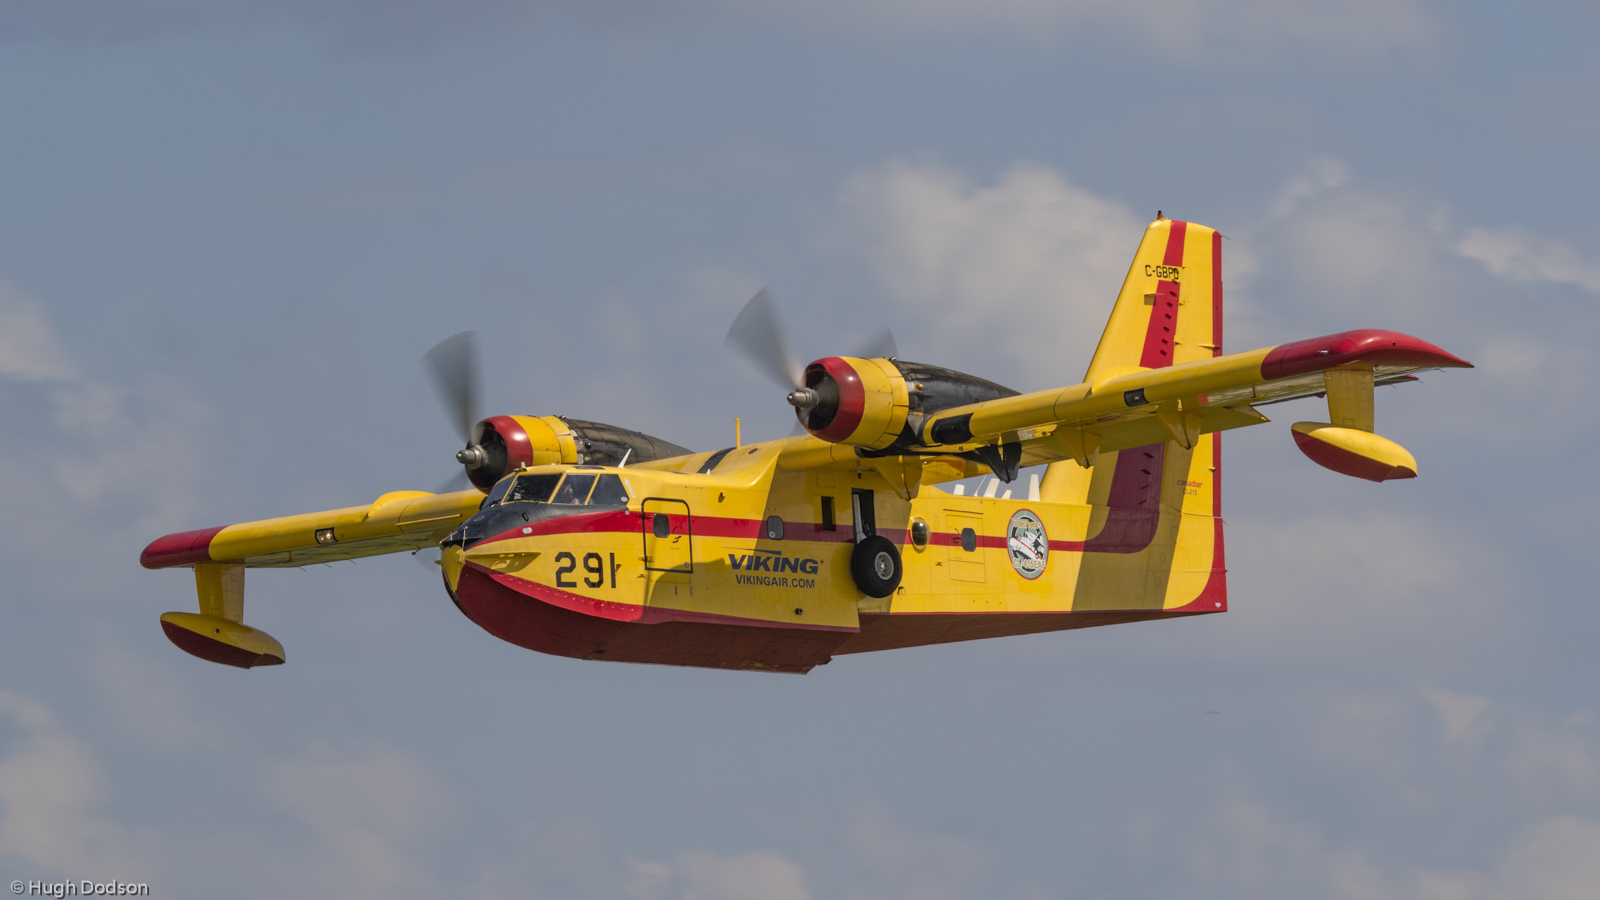 Canadair CL-415 - Page 8 51380613526_95940b90f2_o_d